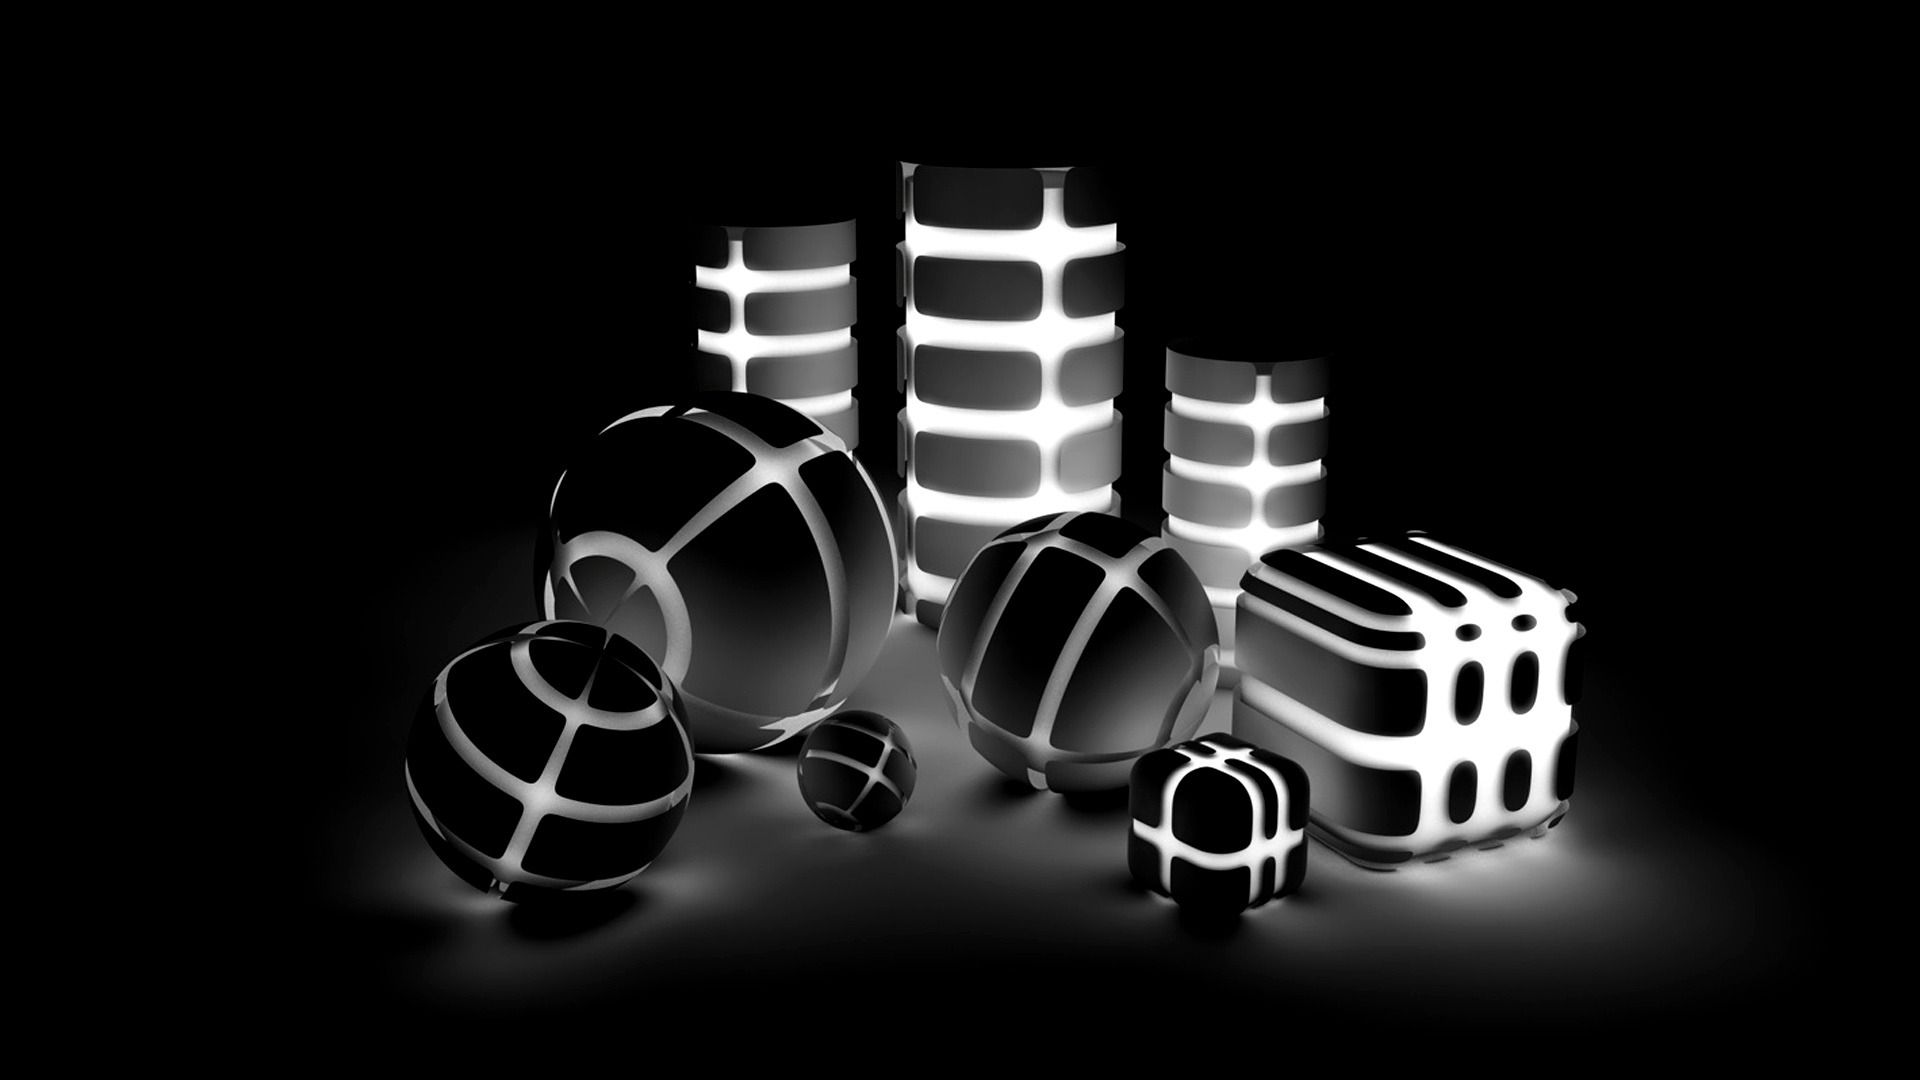 Black And White 3d Wallpaper Hd